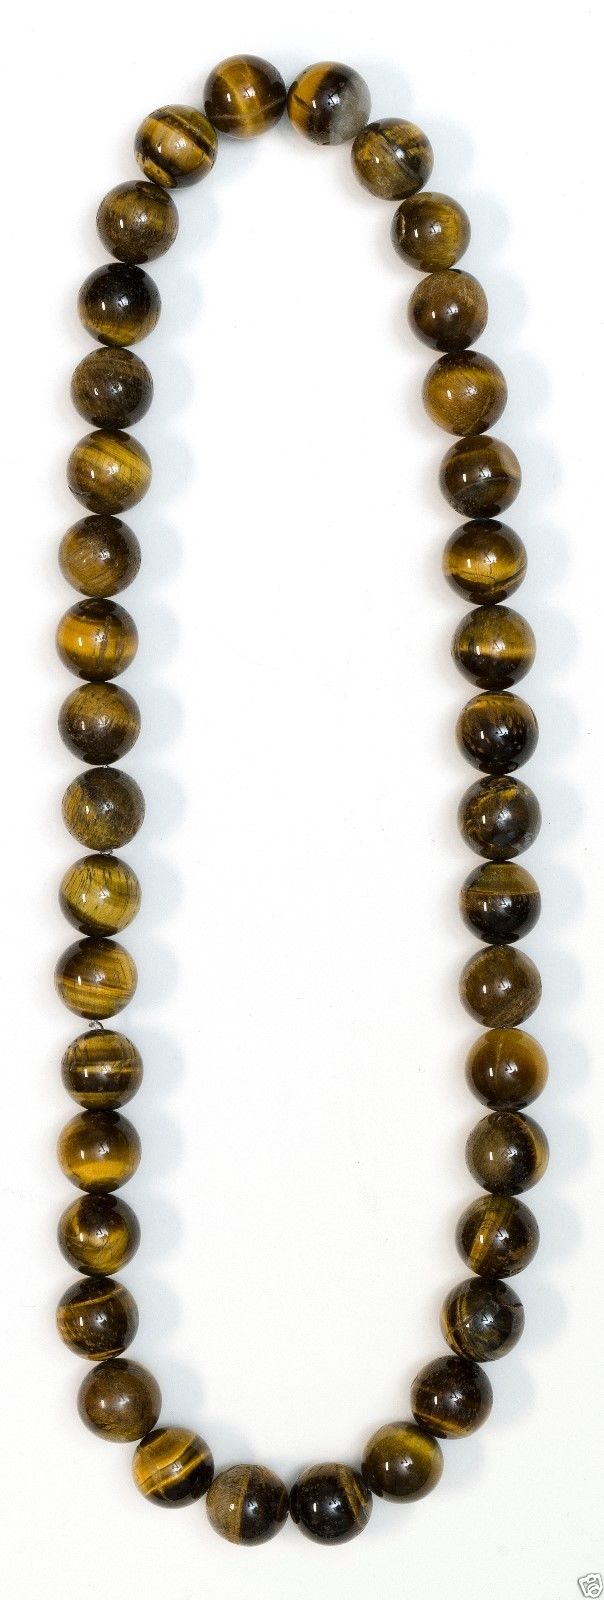 Jewelry016 Estate 38 tiger's beads necklace, bead 17mm, 24-26 in